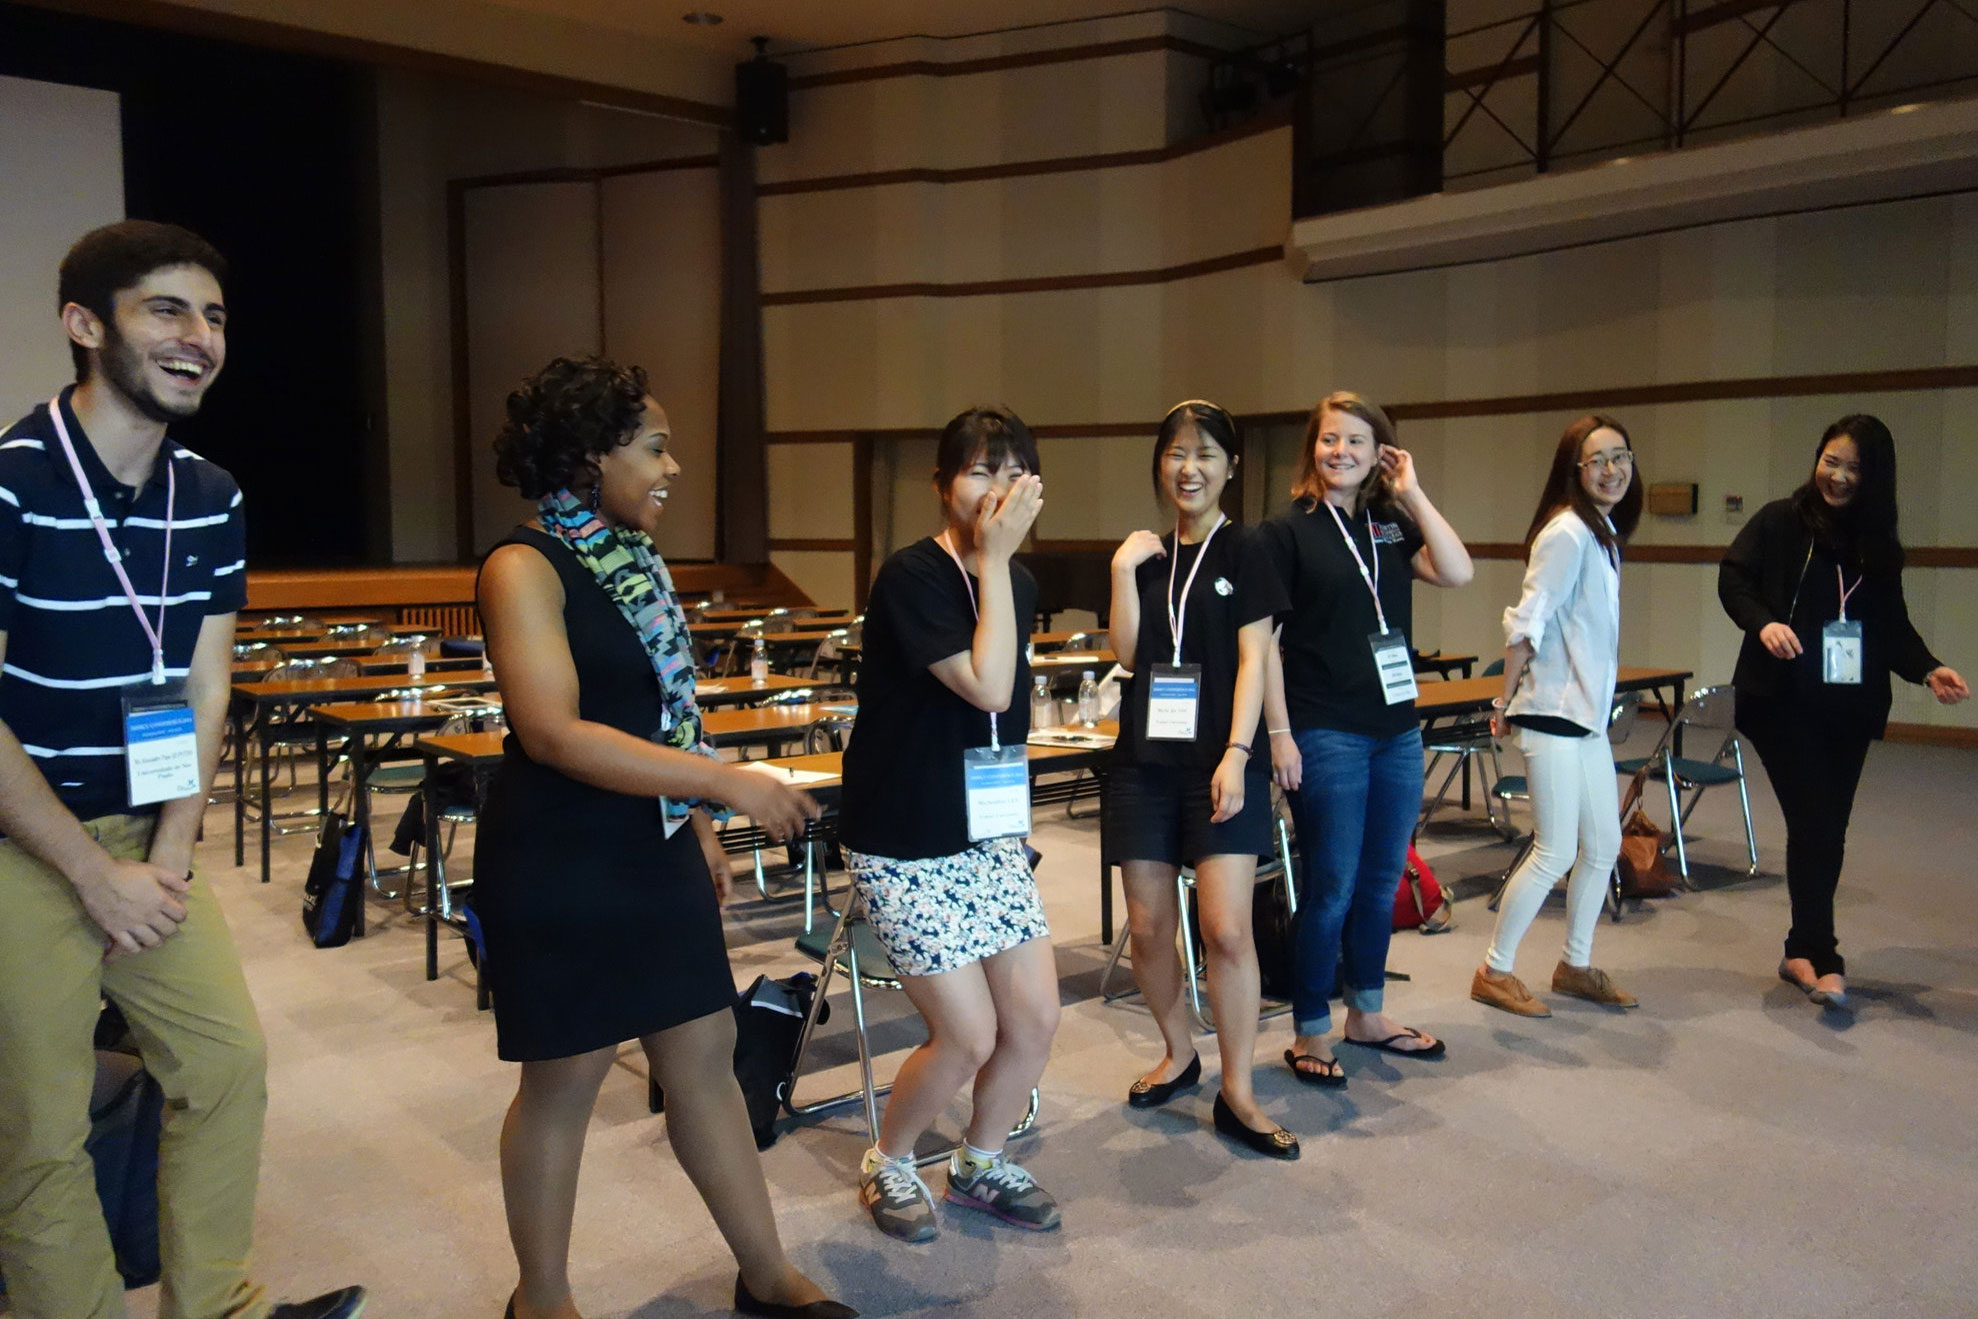 Students attending the triennual IAMSCU Conference pass an imaginary "energy ball" during a workshop at Hiroshima Jagakuin University on May 27, 2014. File photo by Diane Degnan, United Methodist Communications.